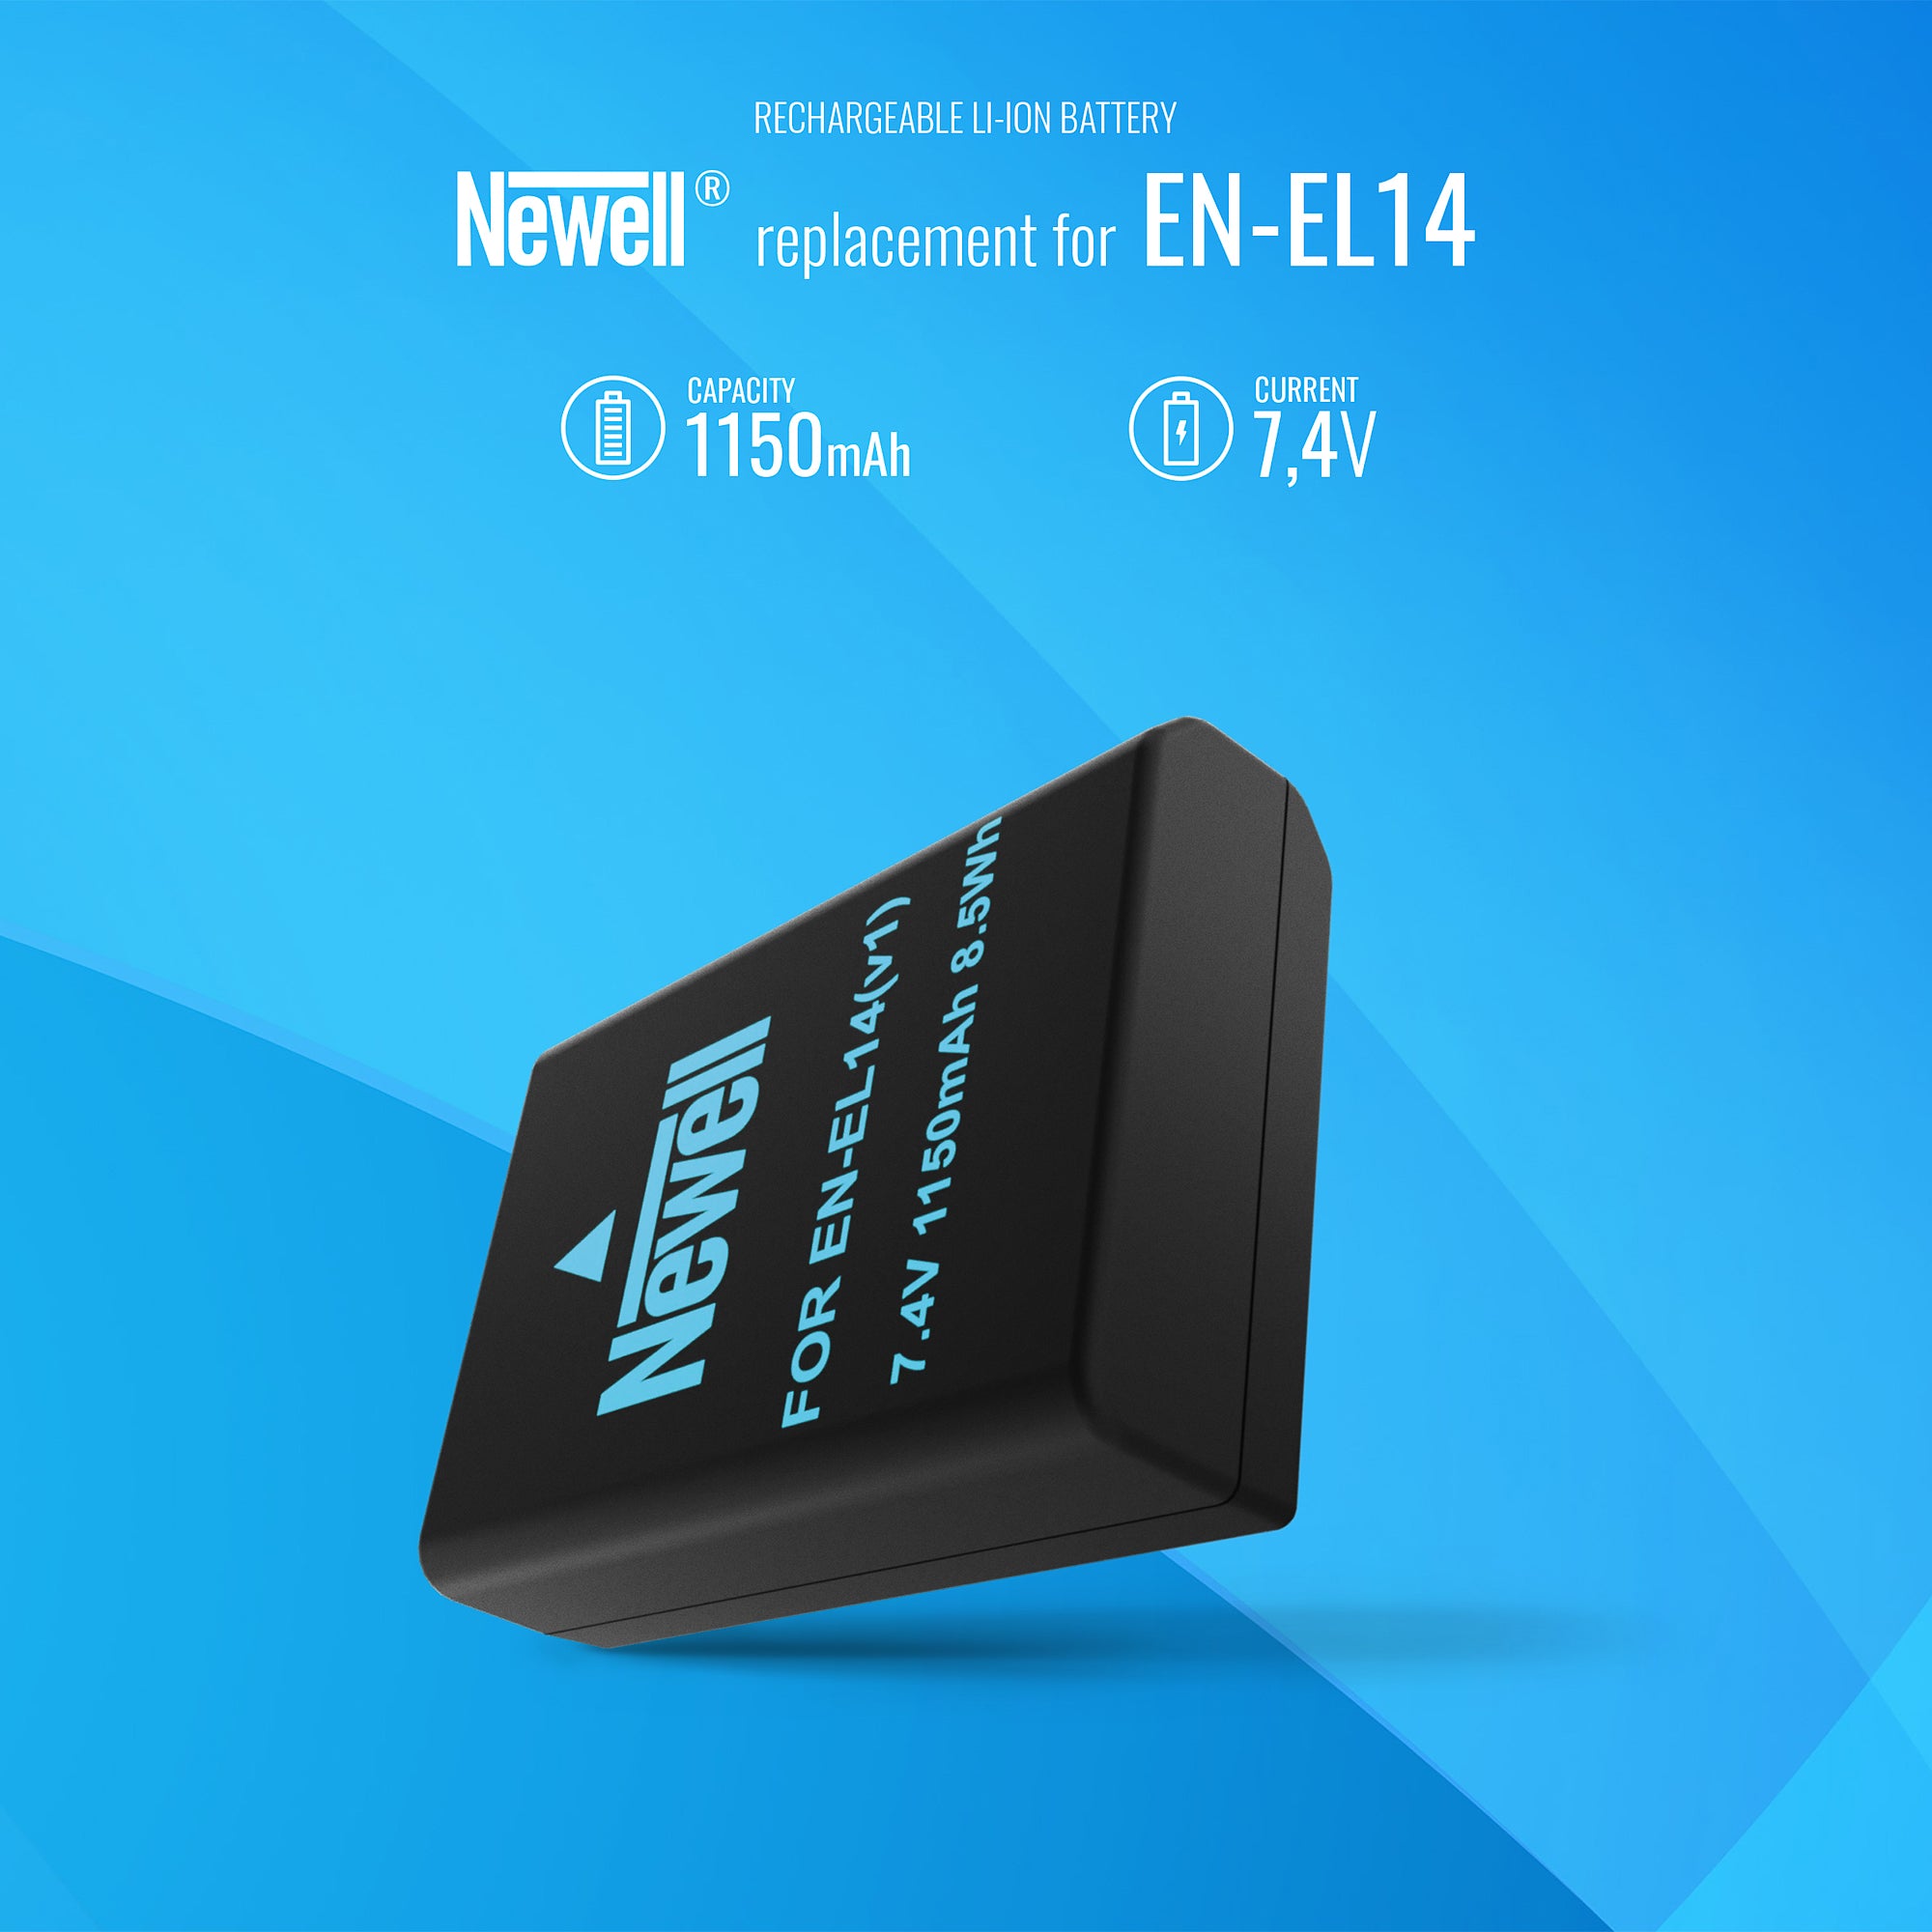 Newell DL-USB-C charger and 2x EN-EL14 batteries for Nikon